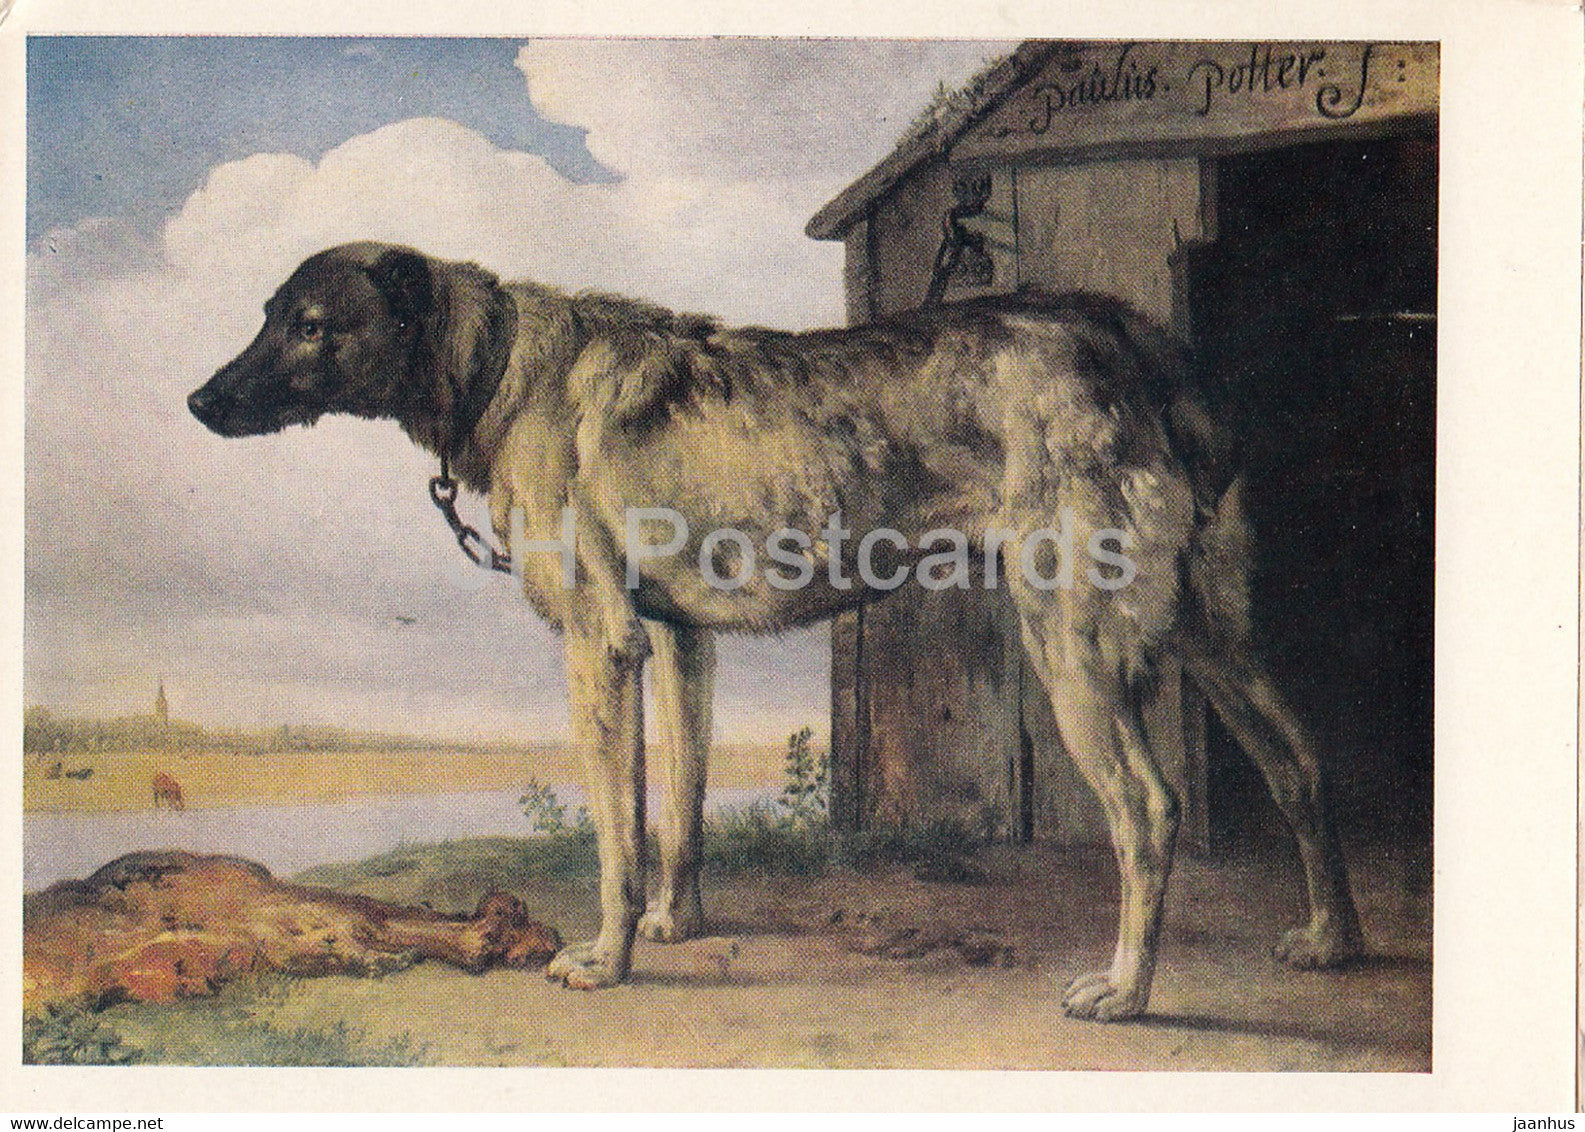 painting by Paulus Potter - Chain dog - Dutch art - 1964 - Russia USSR - unused - JH Postcards